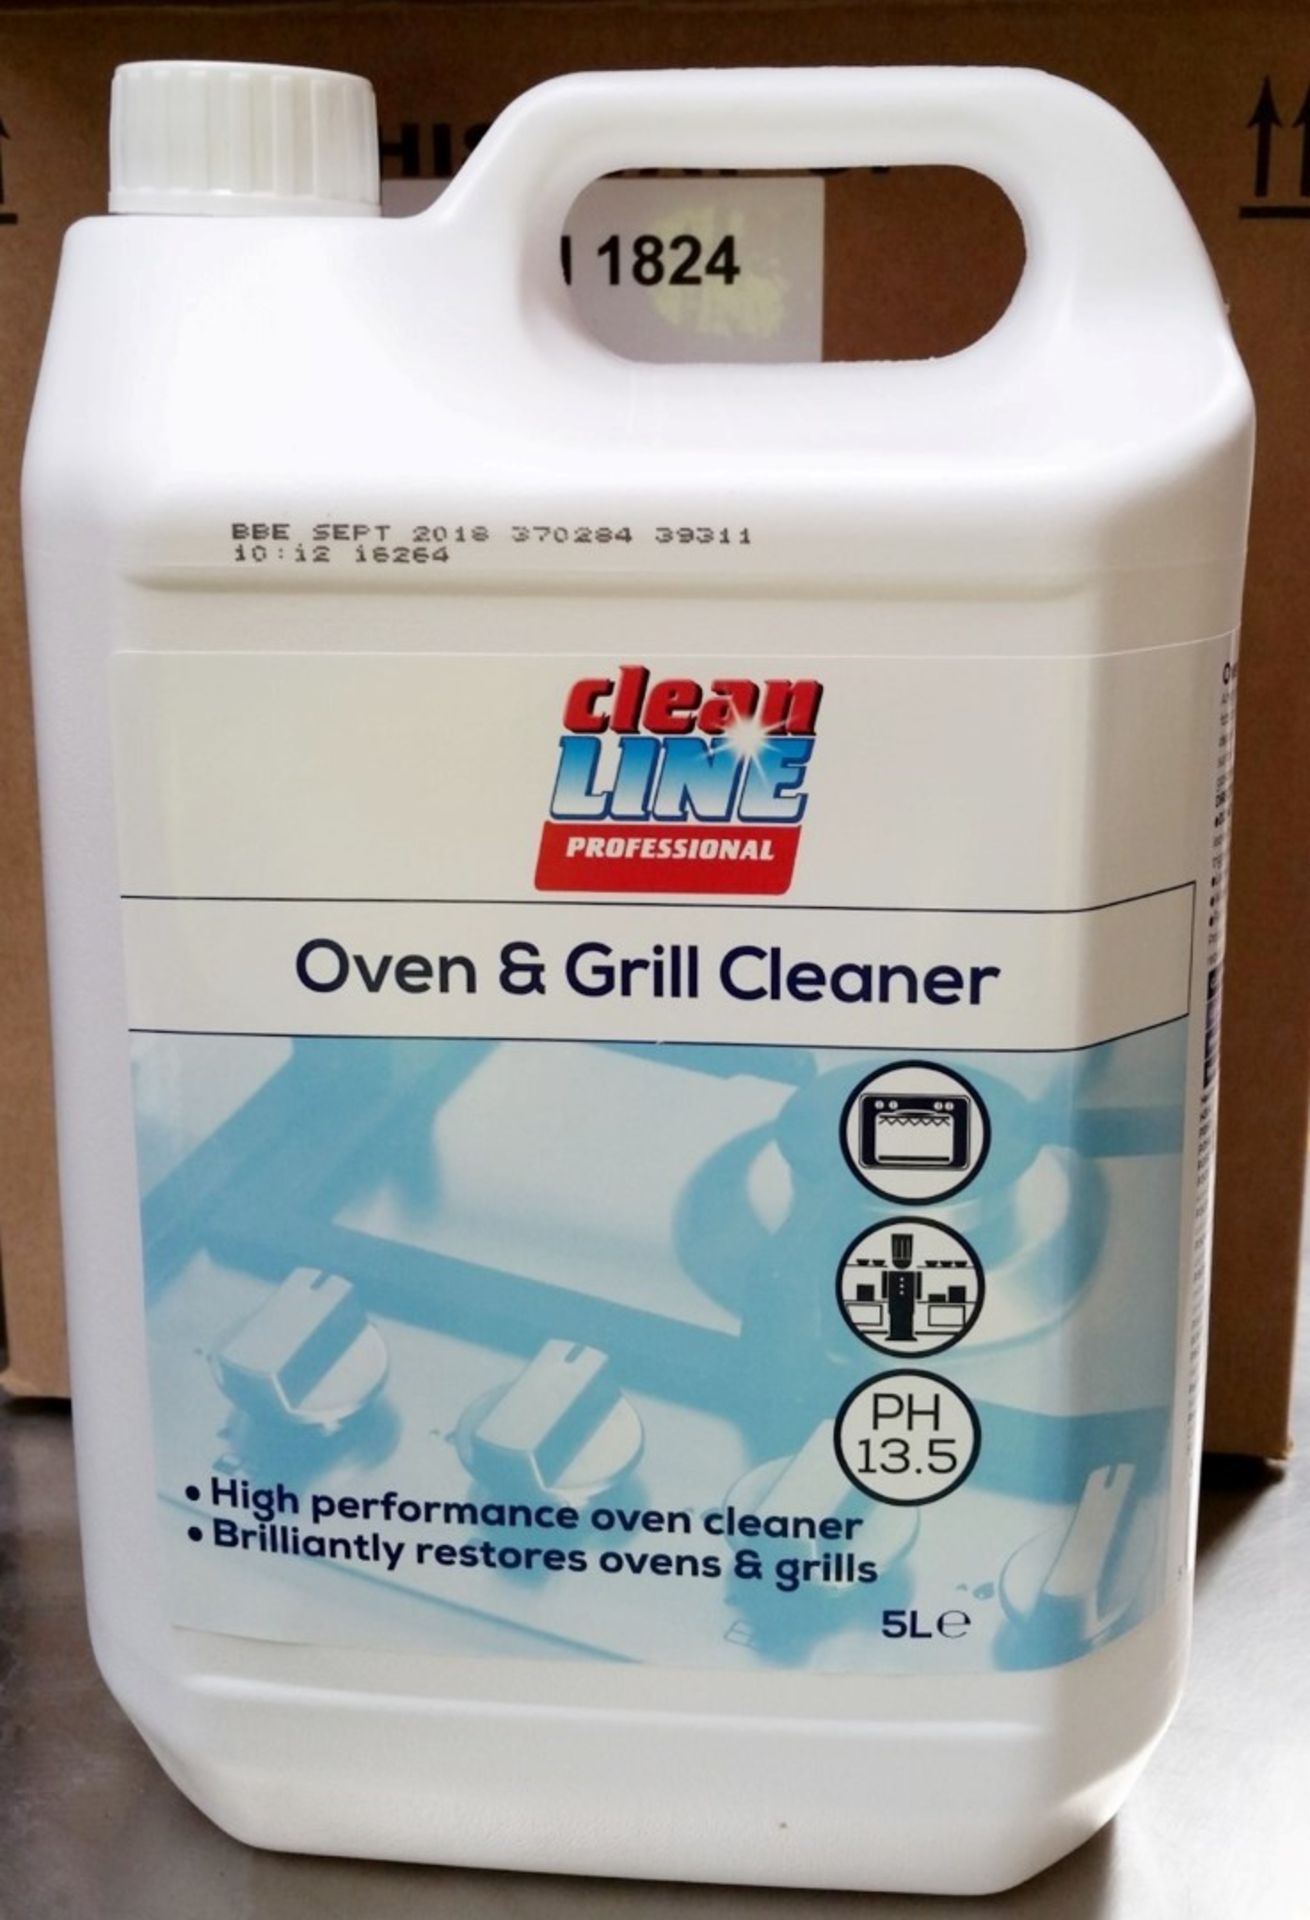 10 x Clean Line Professional 5 Litre Oven & Grill Cleaner - High Performance Oven Cleaner -